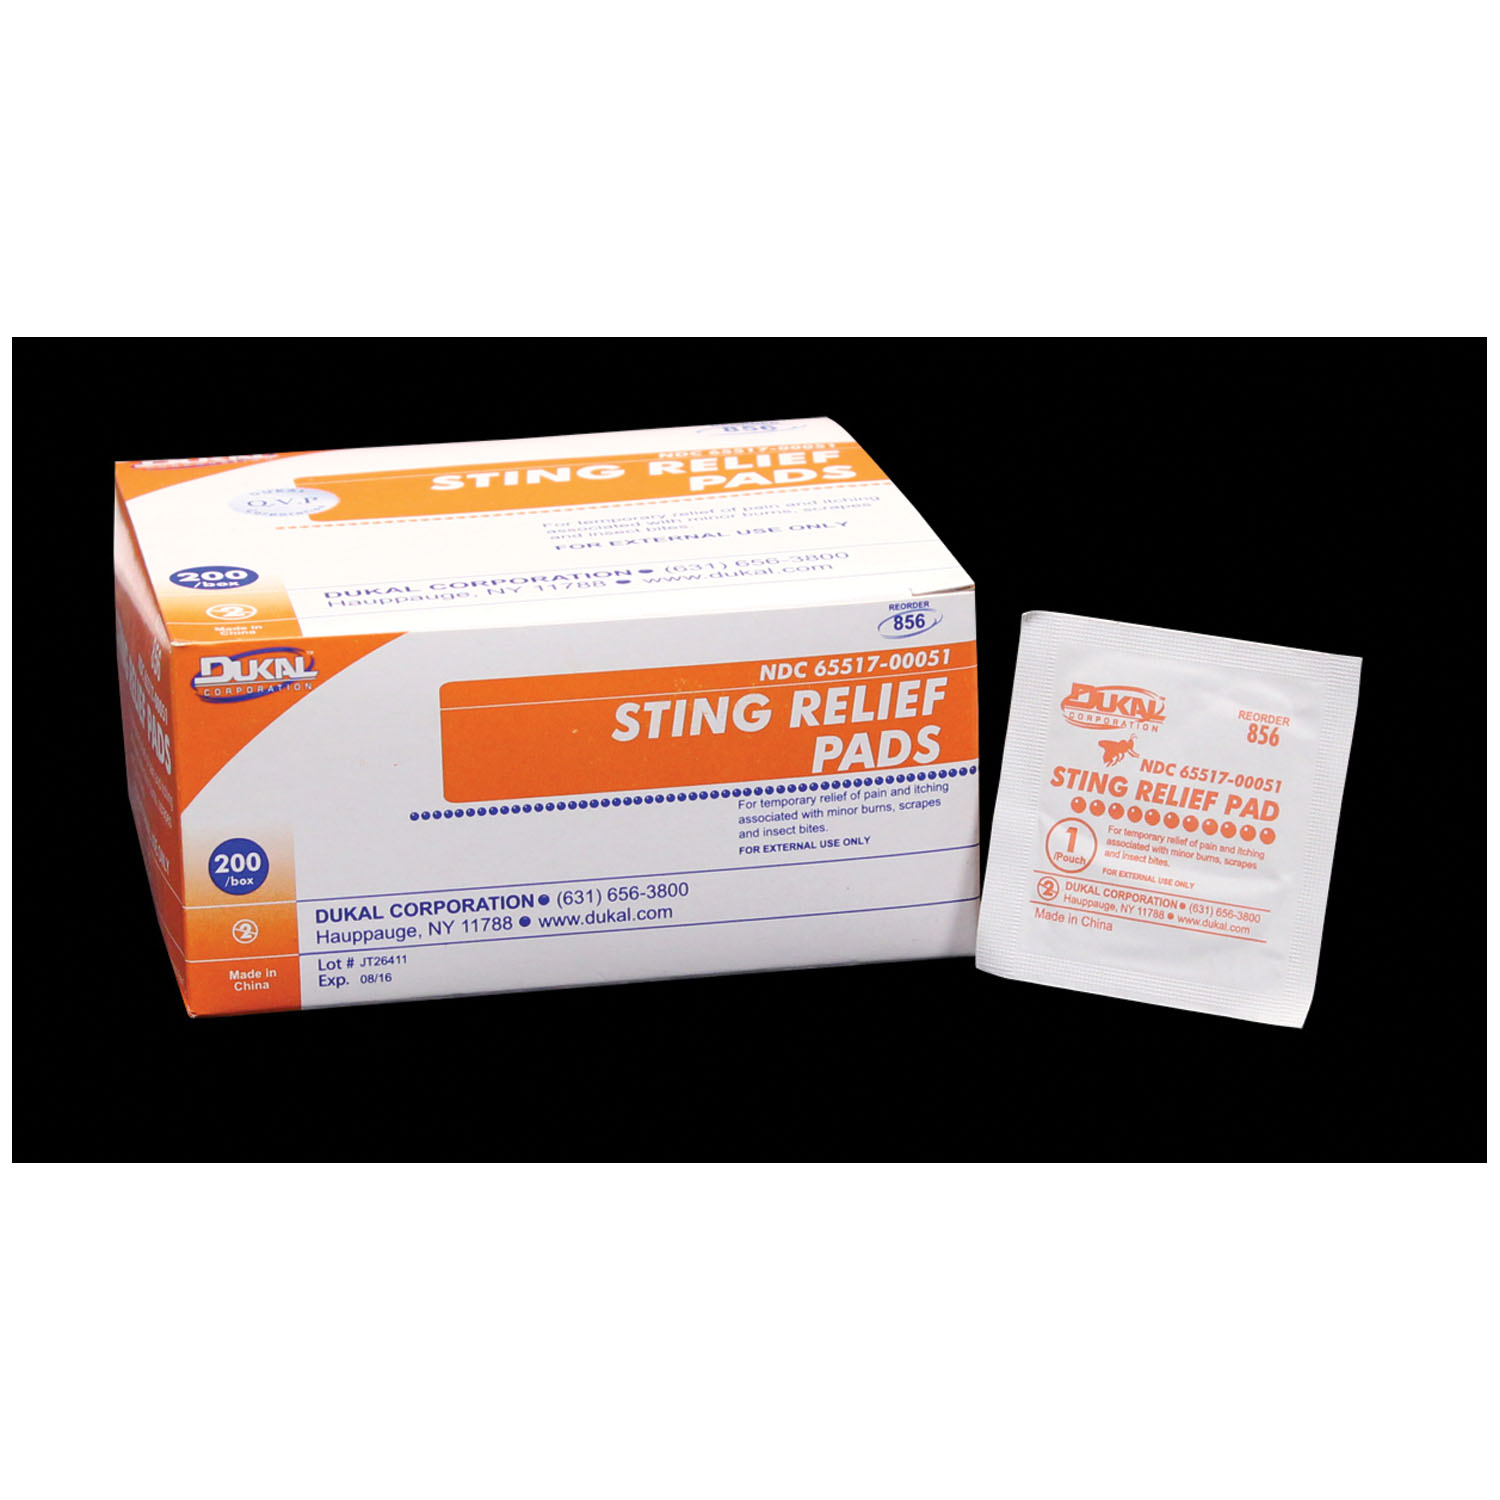 DUKAL STING RELIEF PAD : 856 BX $4.83 Stocked